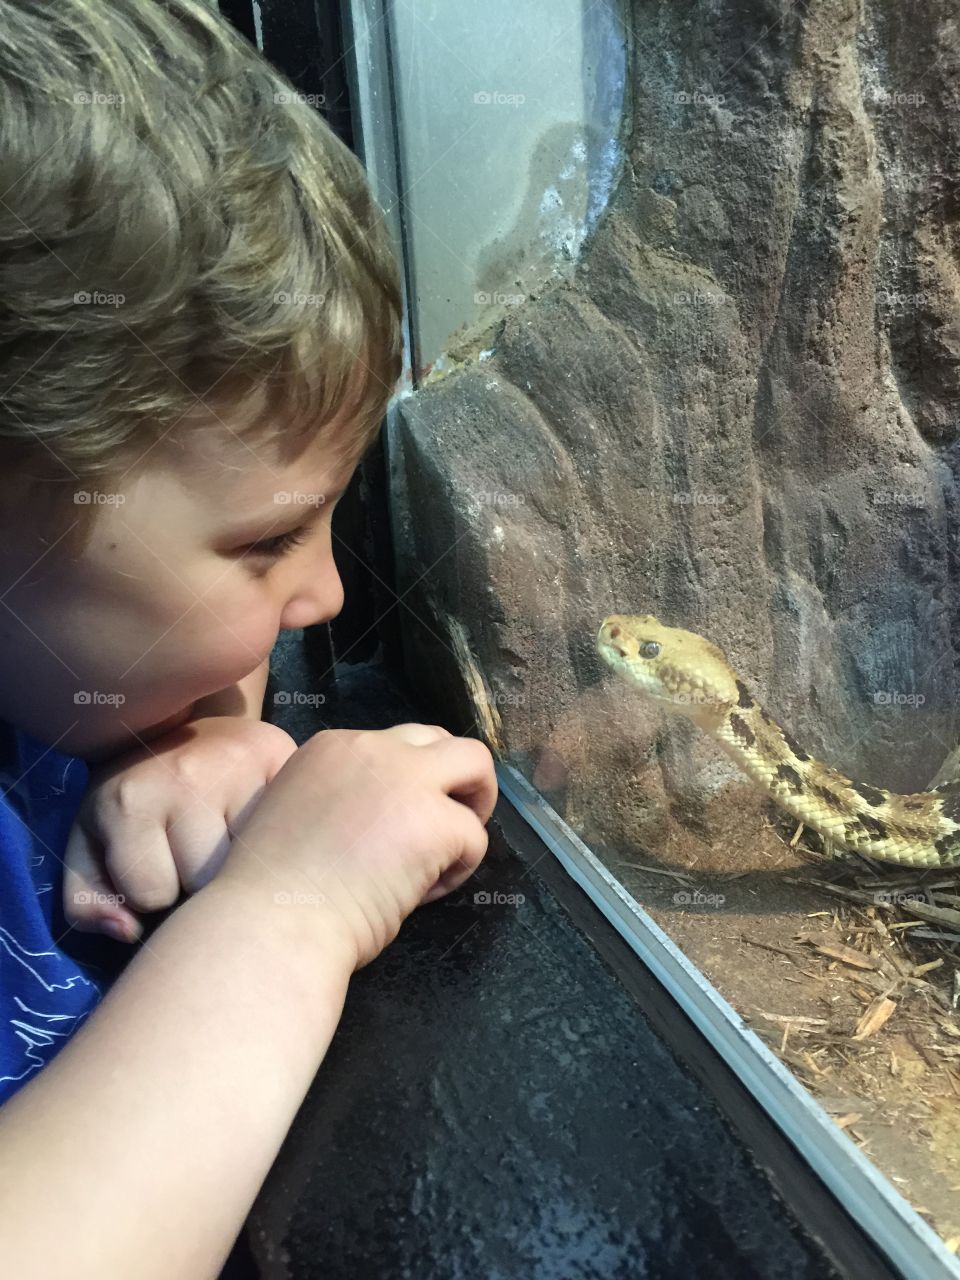 Boy looking at snake through glass window